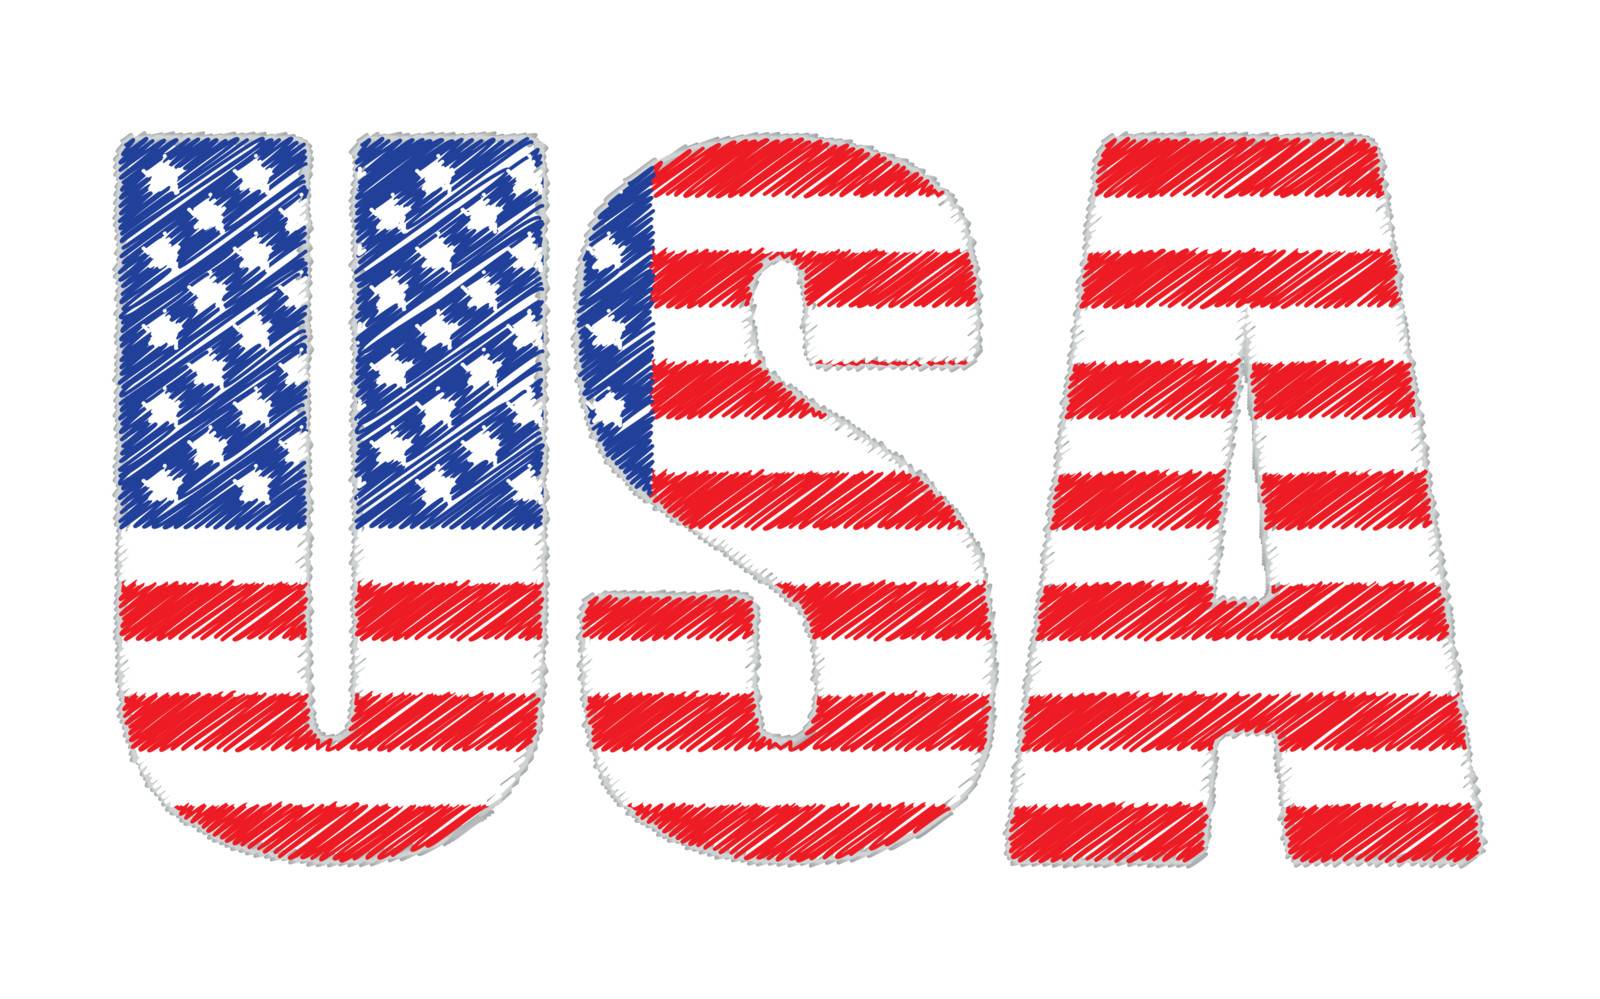 USA made of scribbled United States flag vector illustration